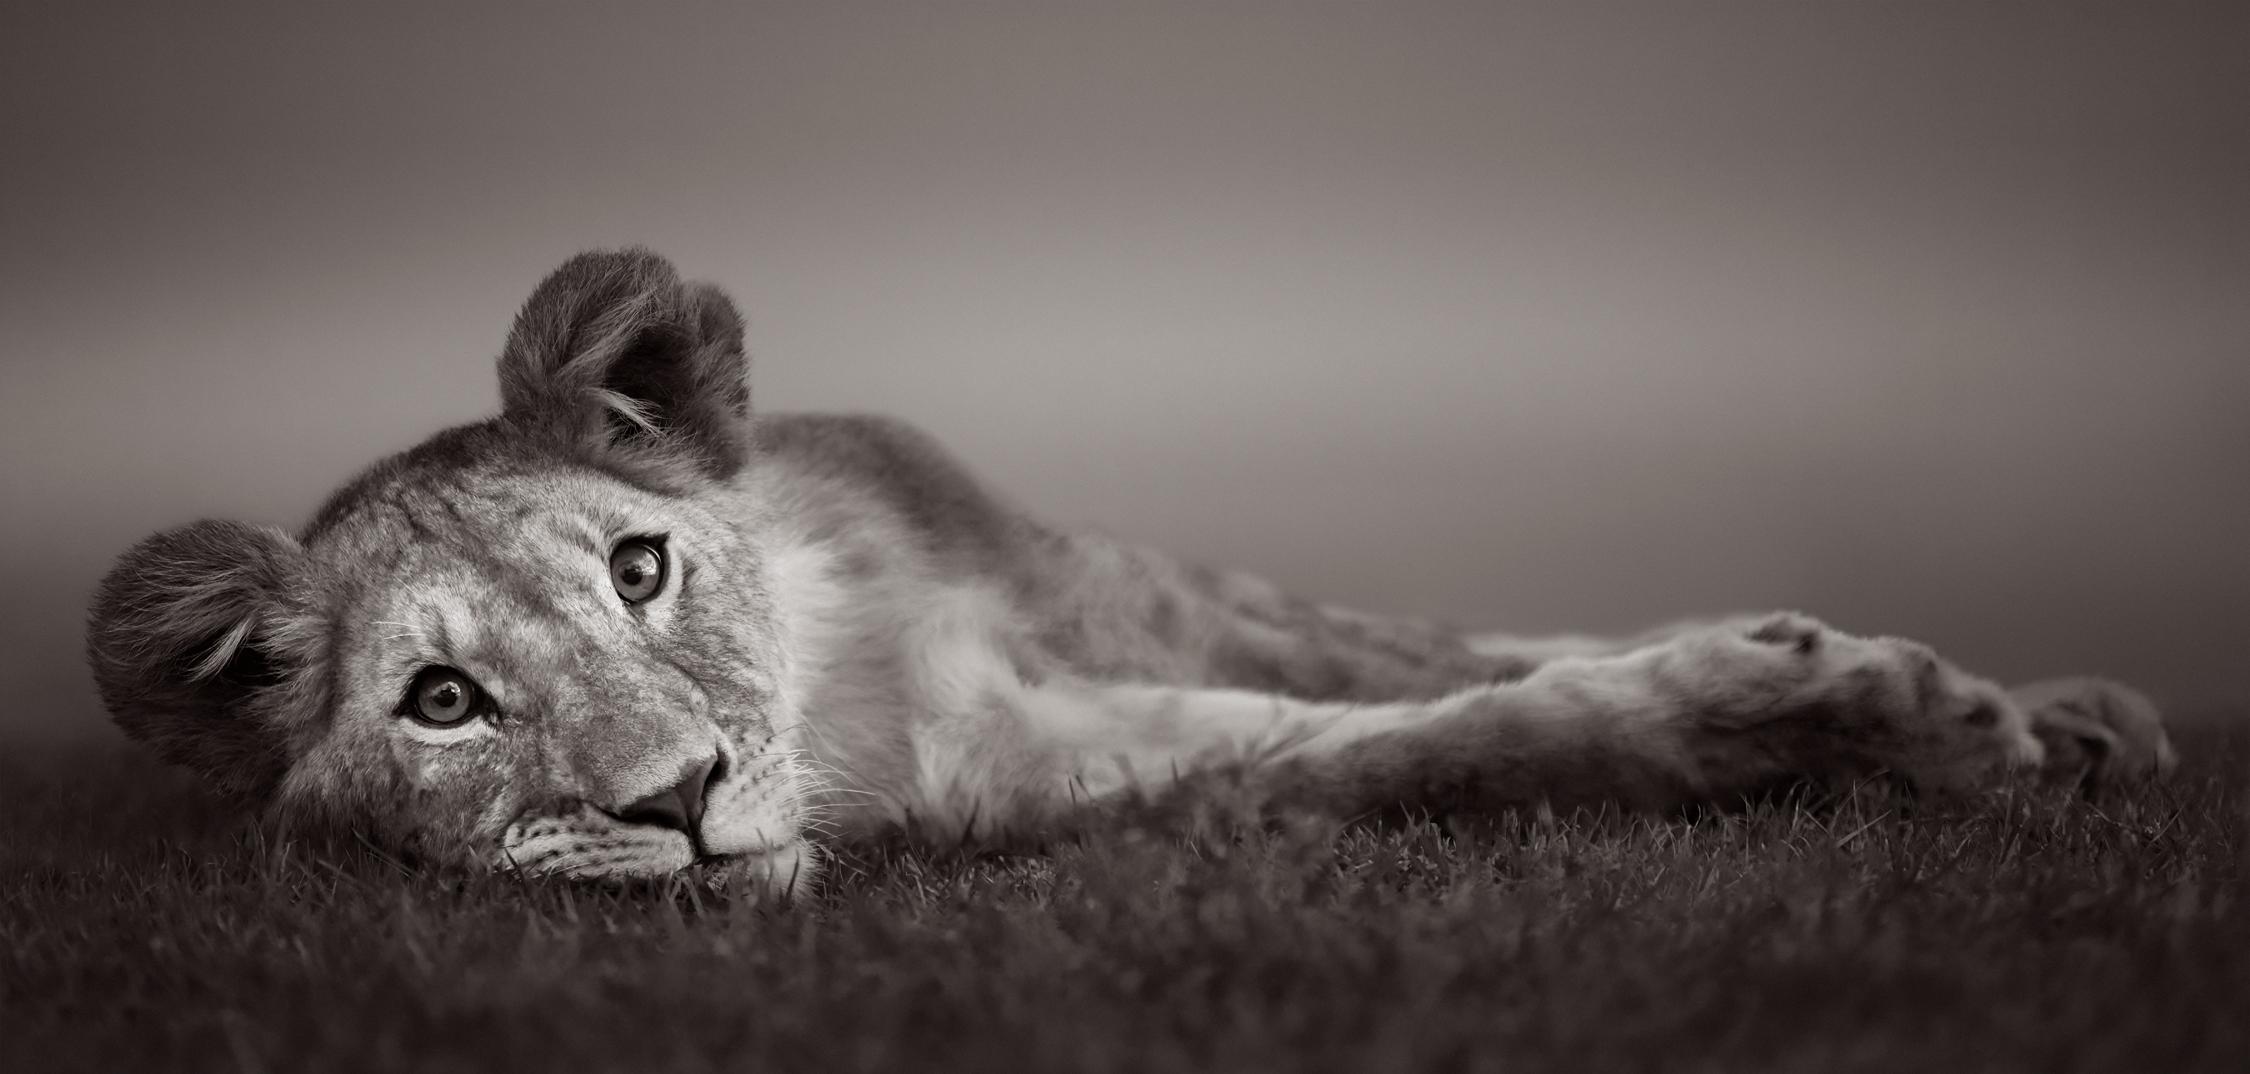 Drew Doggett Black and White Photograph – Young Lion Cub Relaxing in the Grass, Schwarz-Weiß, Kenia